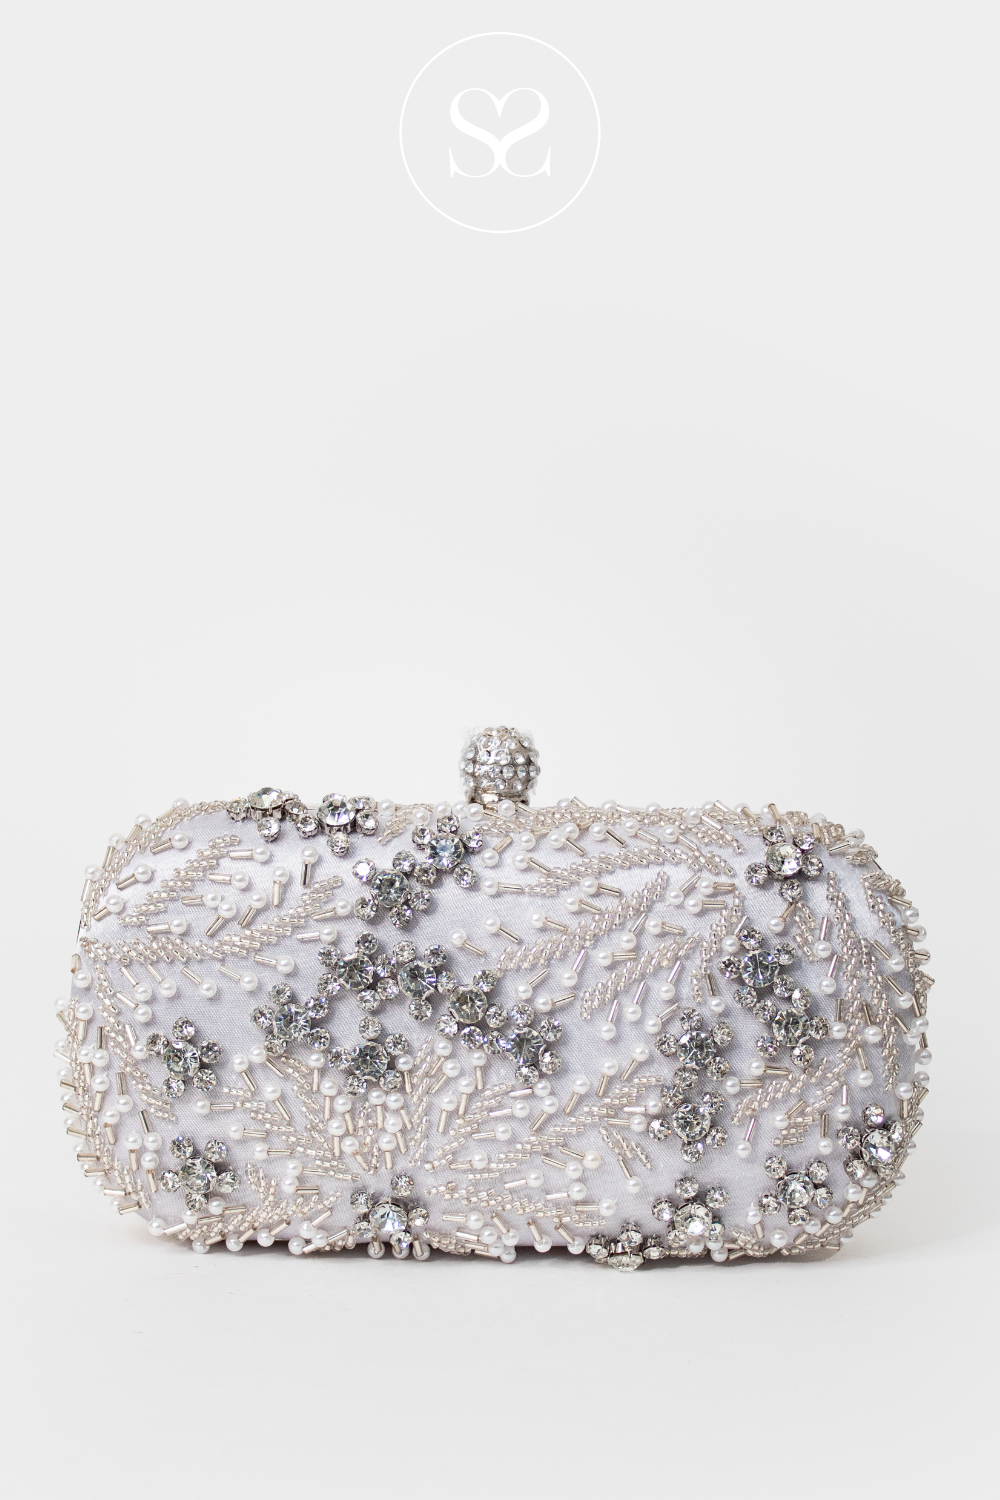 SHENEIL 006 IVORY GREY PEARL AND SILVER DIAMANTE CLUTCH BAG